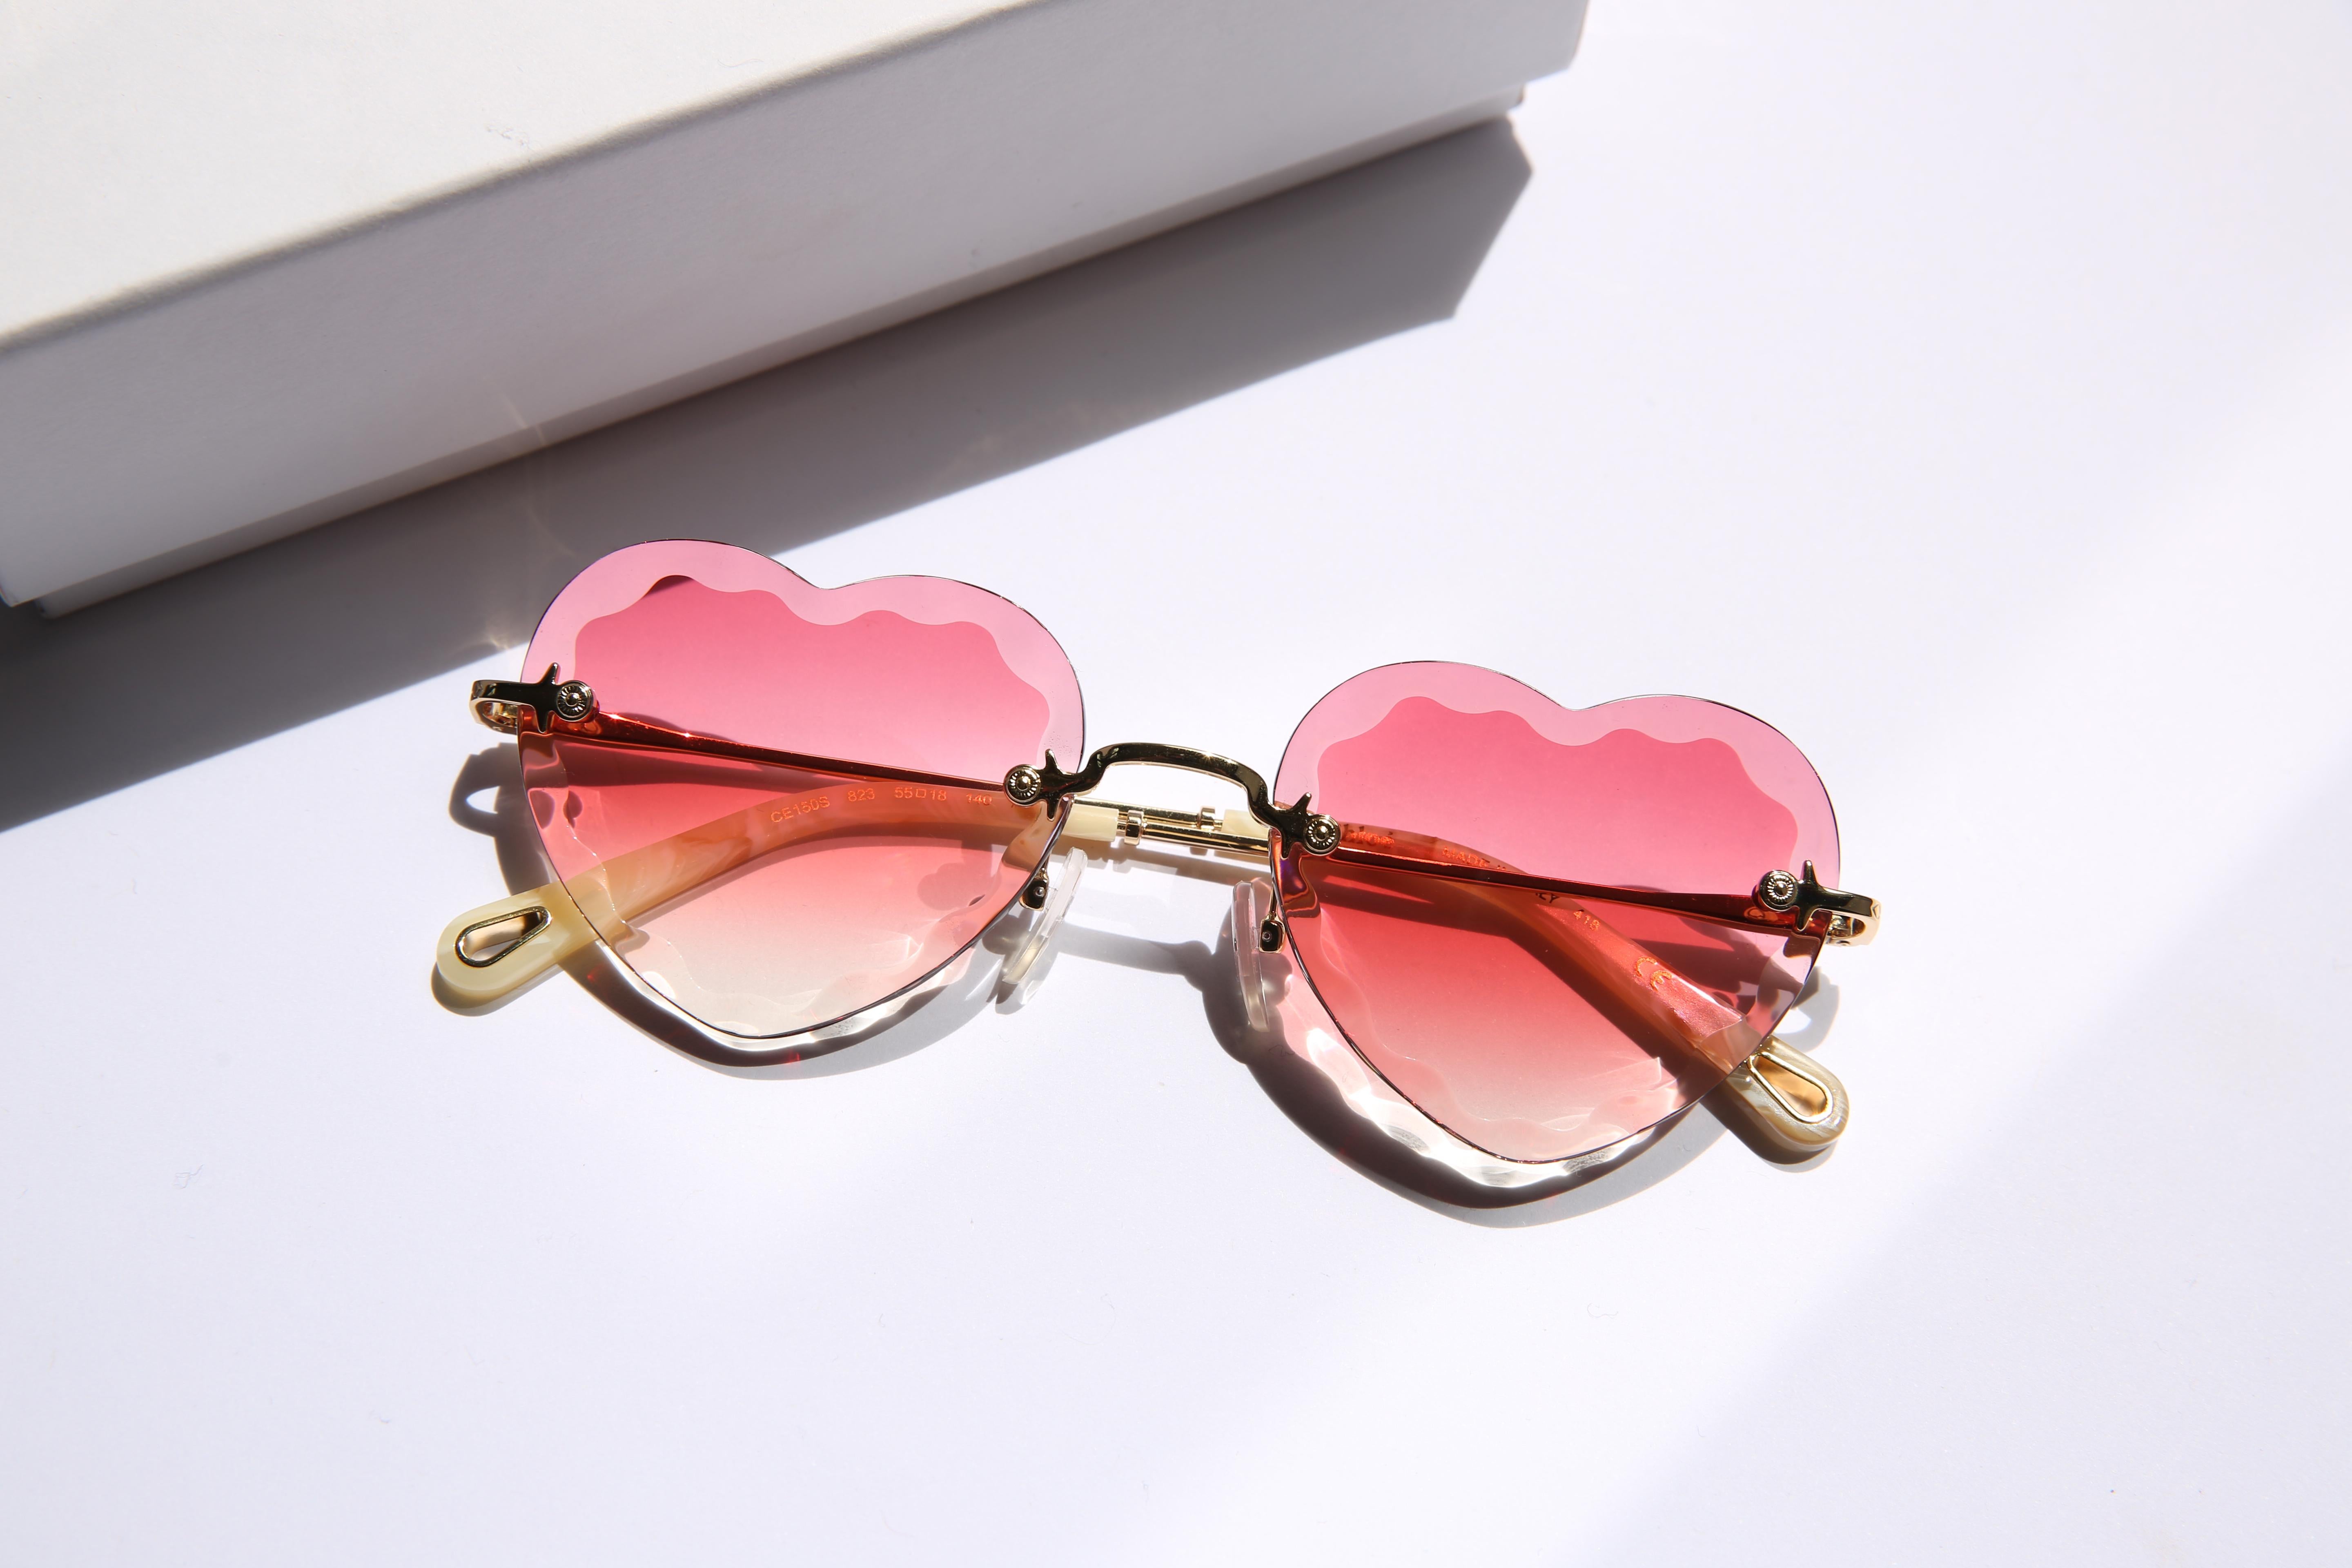 Chloe heart shaped Rosie sunglasses in pink with gold hardware

Unique and feminine with a hint of mischief, the Rosie line is reimagined in a playful heart shape. Distinctive thick bevelled lenses create a strong yet light silhouette in these heart